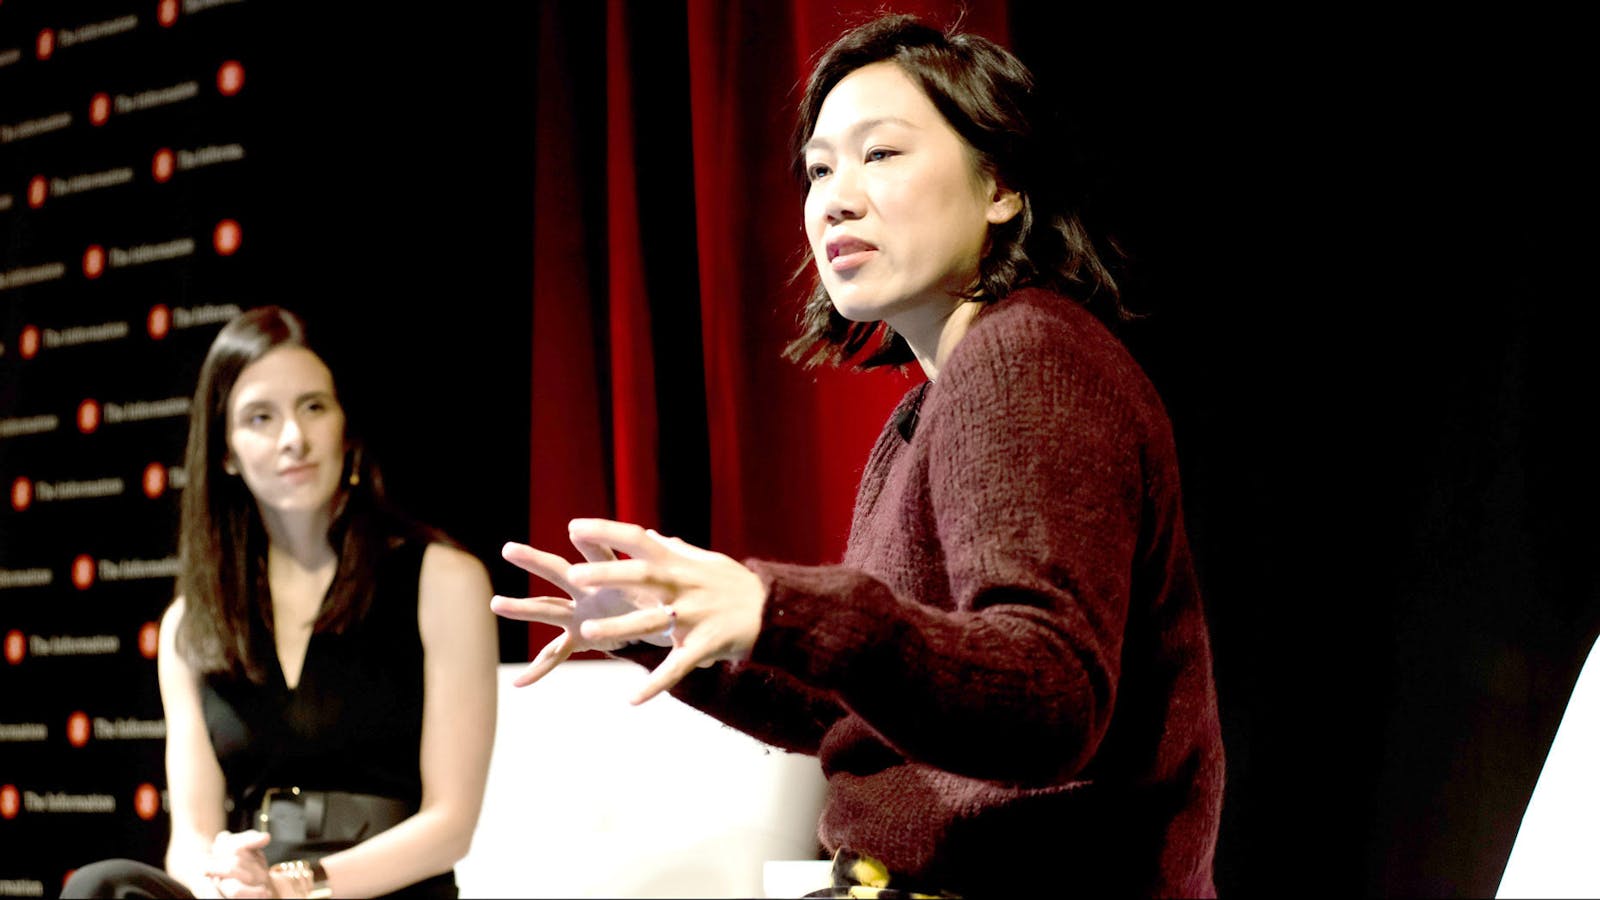 The Information founder Jessica Lessin interviews CZI’s Priscilla Chan. Photo: Angie Silvy